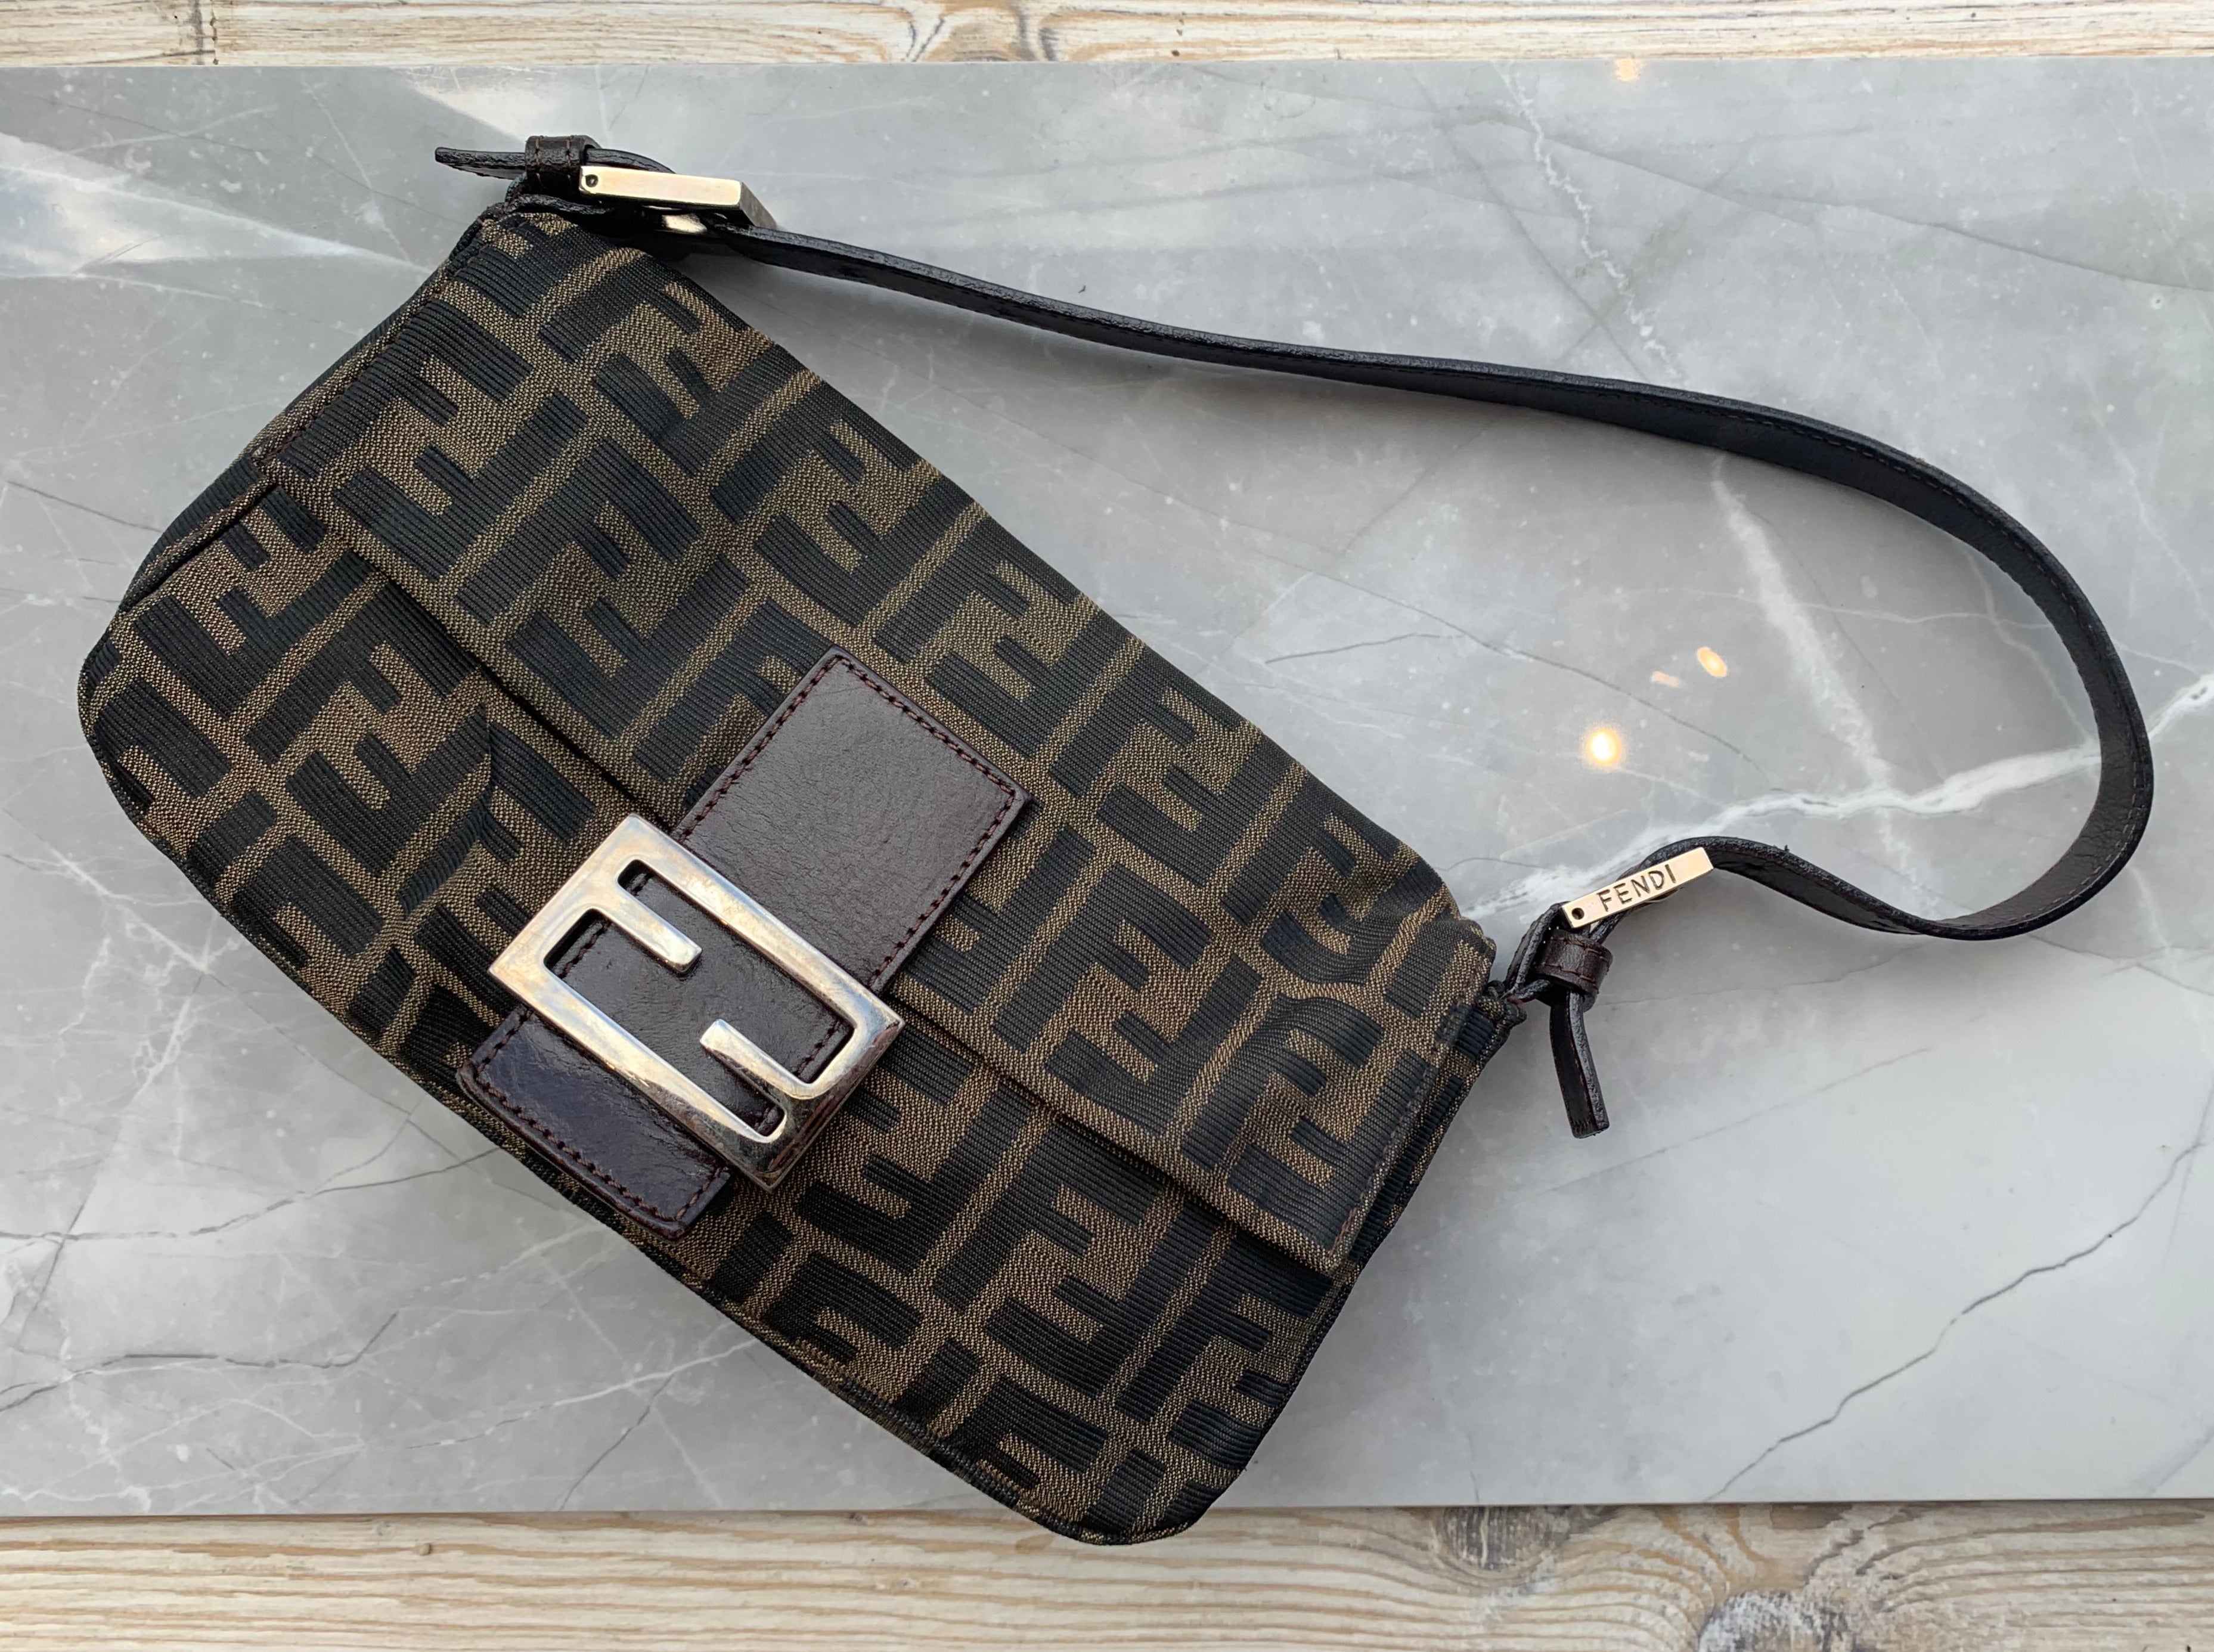 Vintage 00's Fendi Zucca Mama Baguette – For the Ages